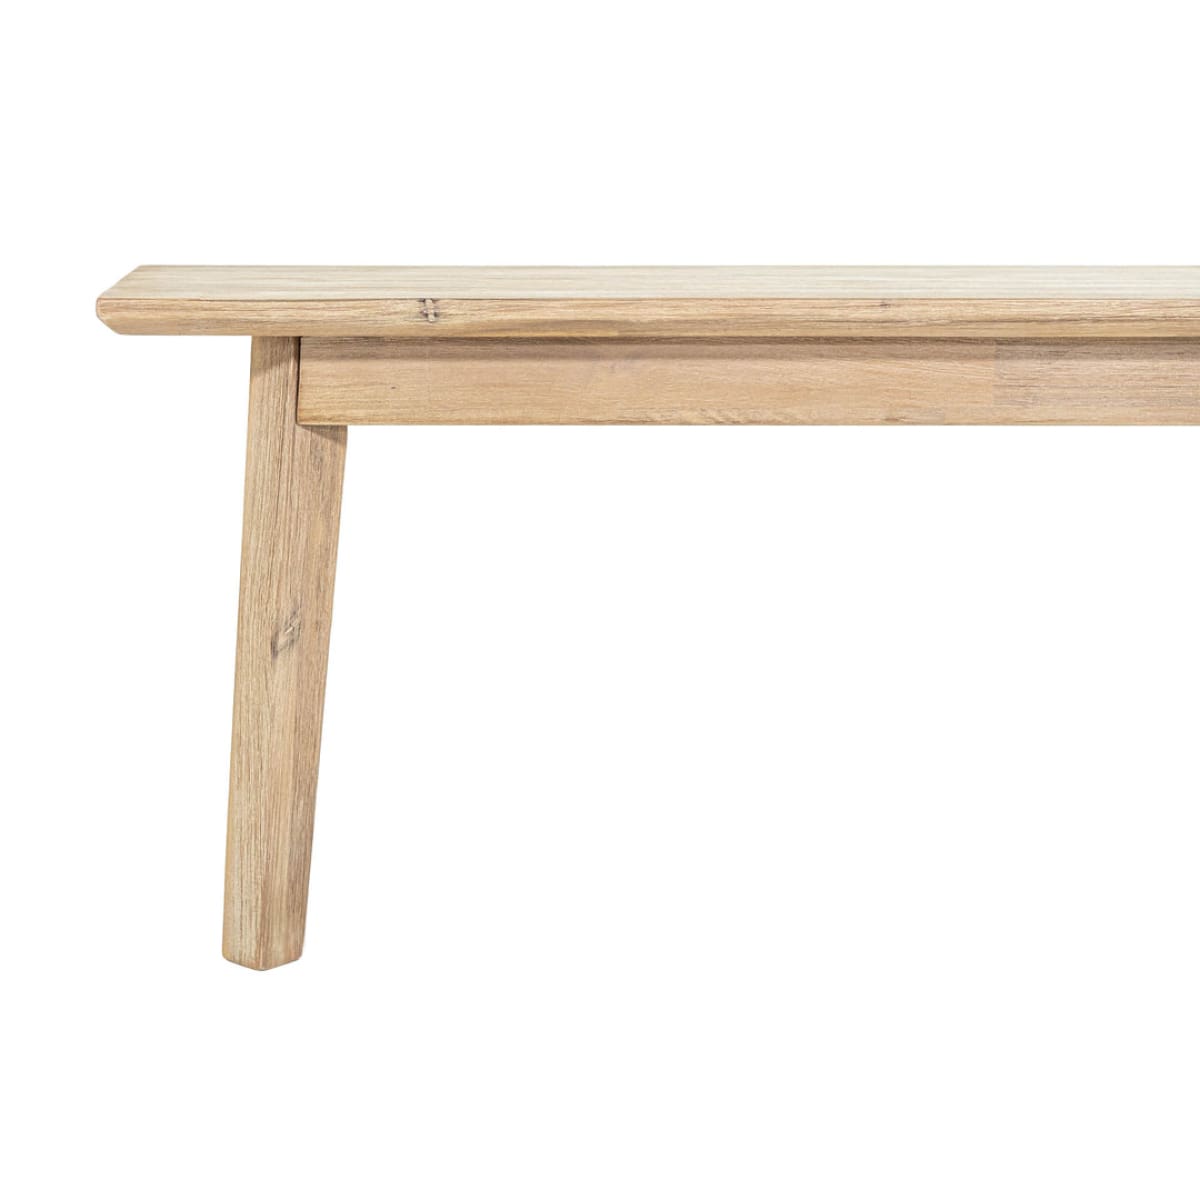 Gia Bench - lh-import-dining-benches